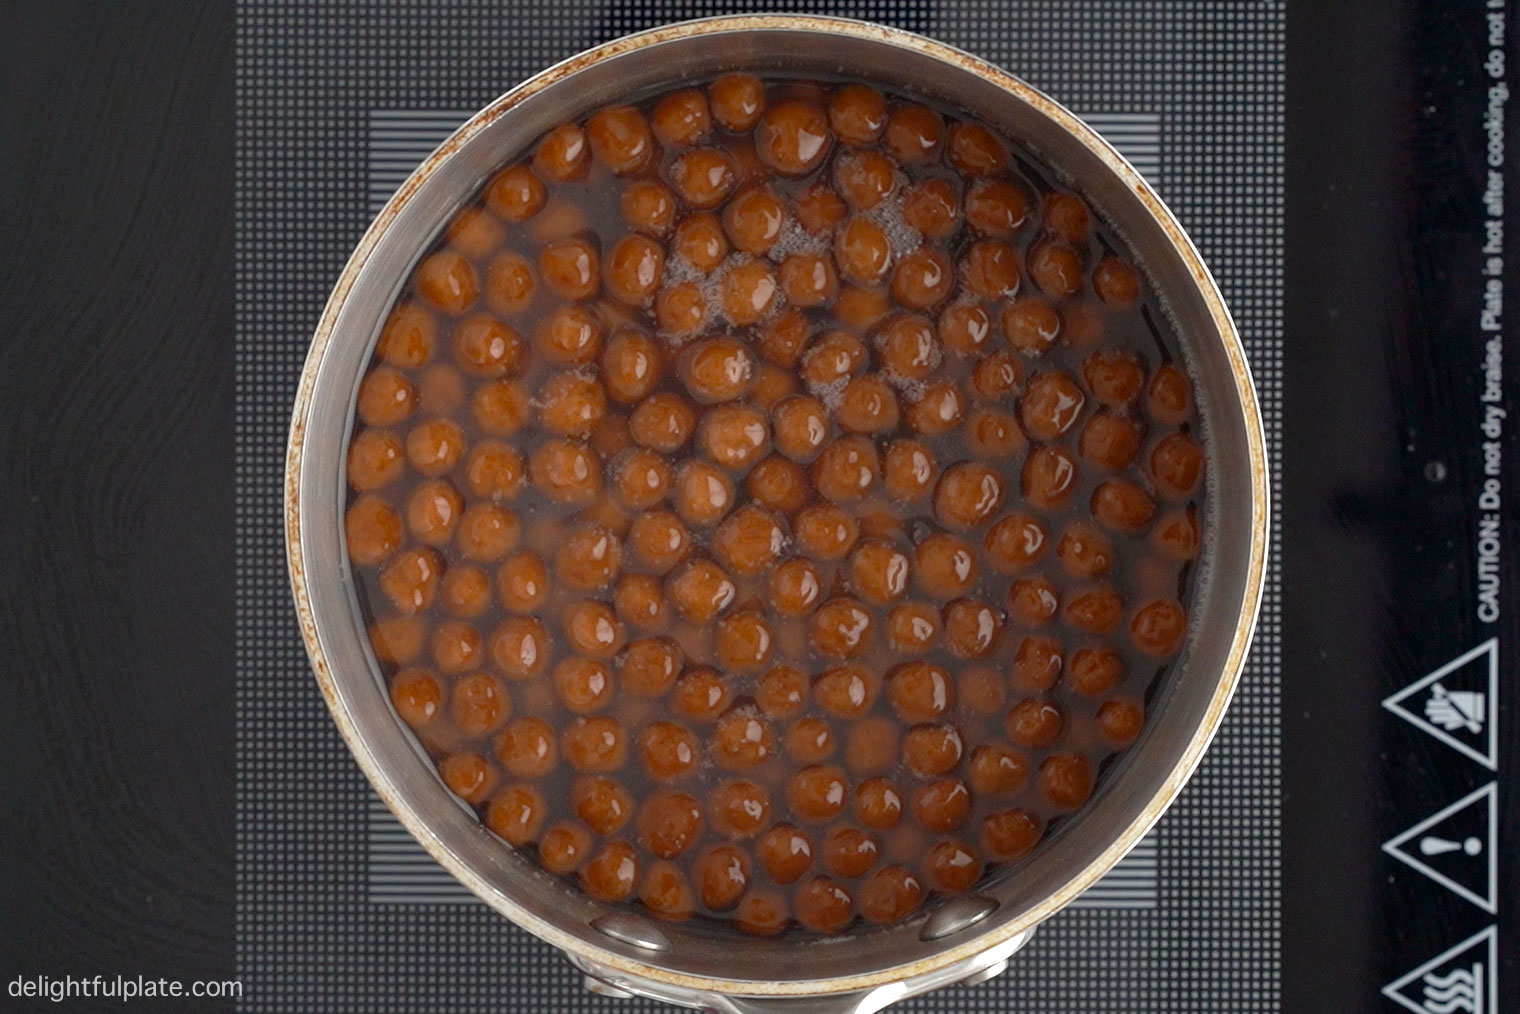 Boba pearls being boiled in a pot